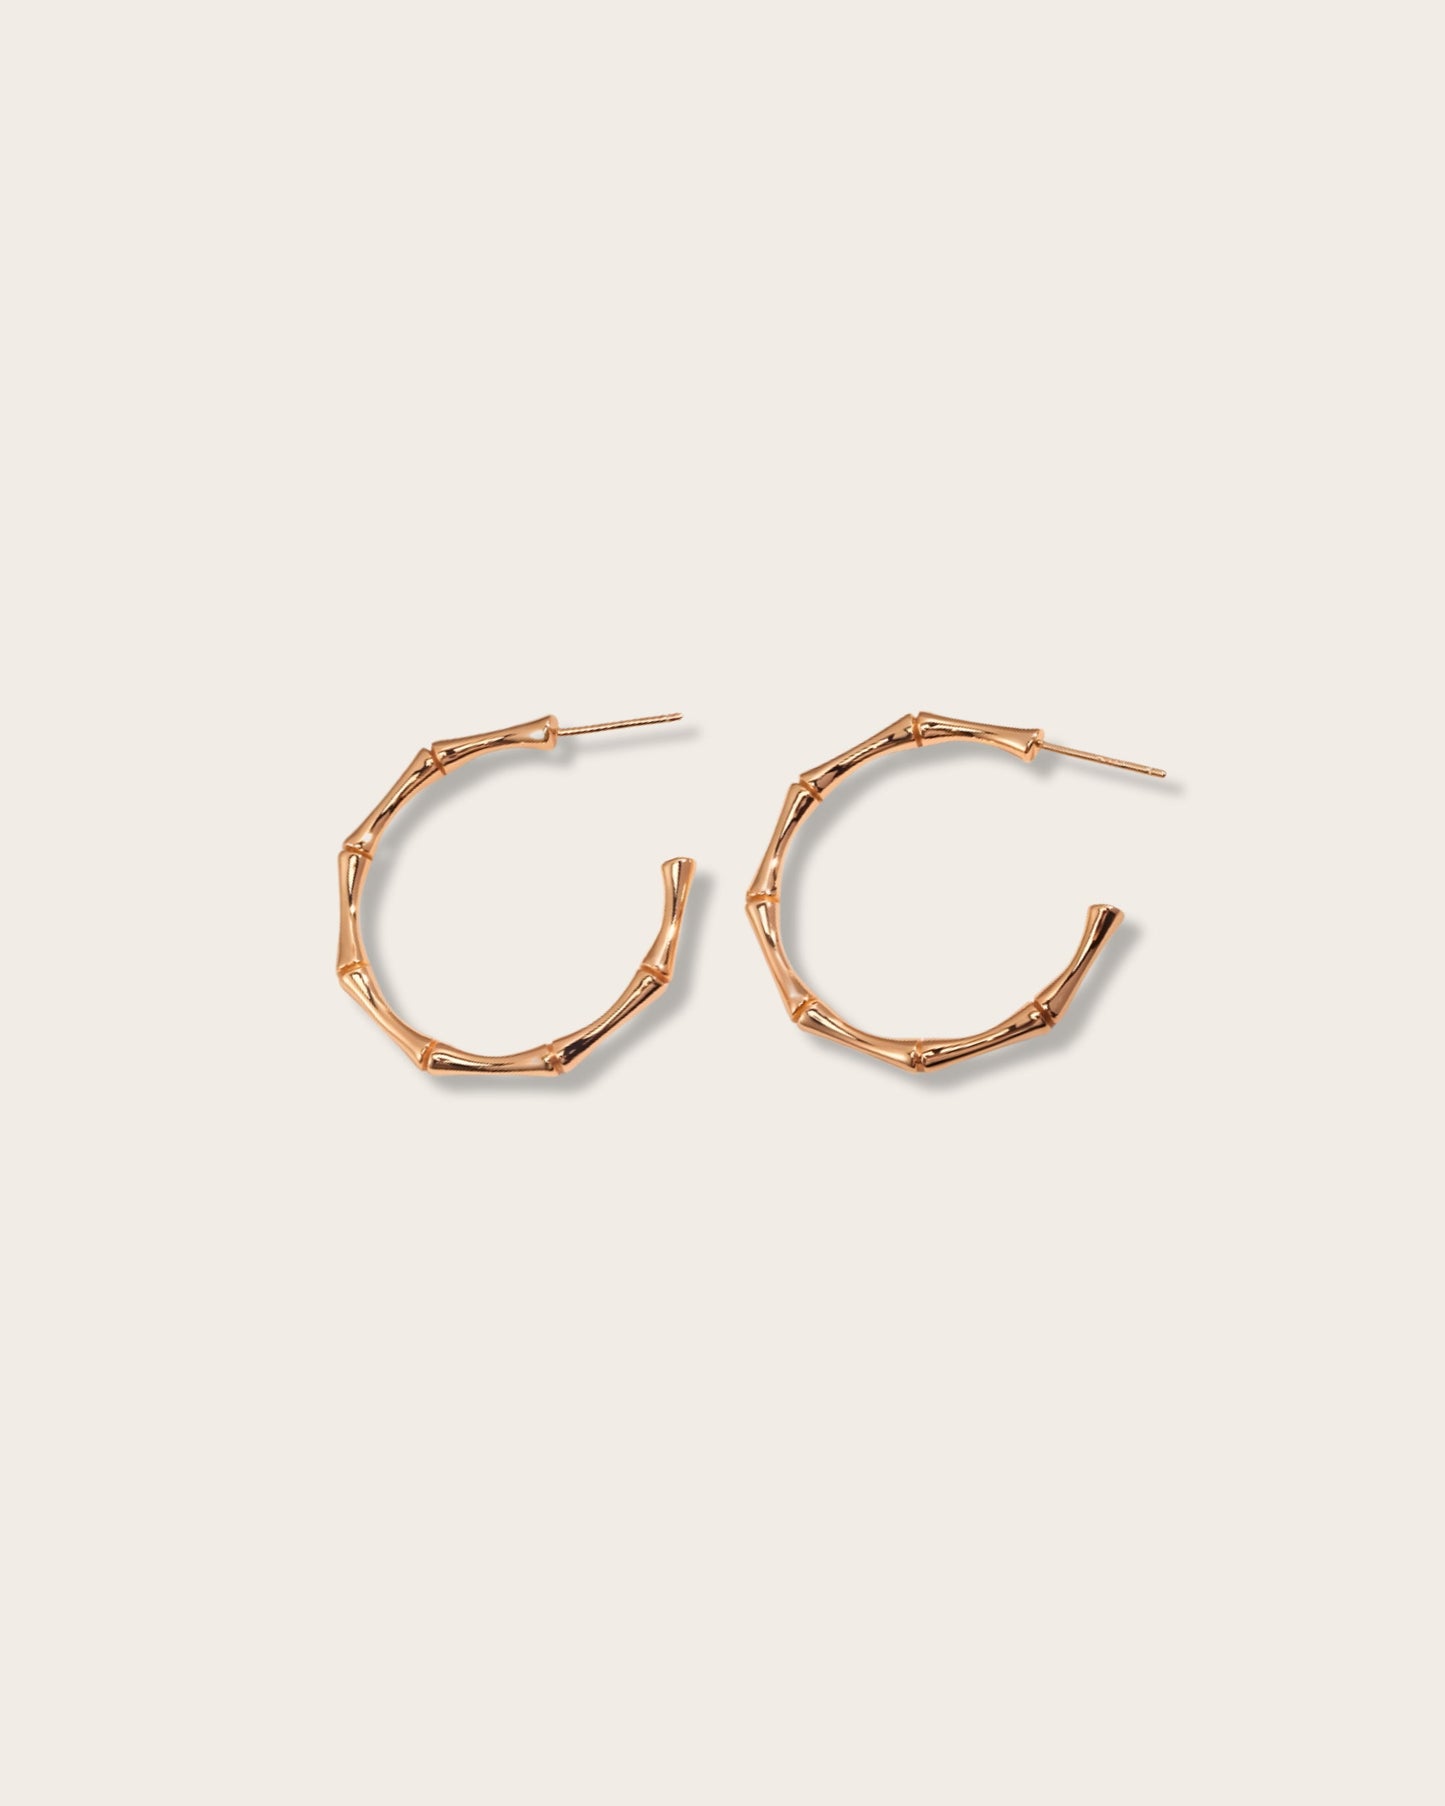 Crafted with love, this necklace features a beautiful Bamboo Knot design - Hoop Earrings - S925 Sterling Silver with 18K Gold Vermeil -  Graceful Orchid Elegance - Timeless design and radiant charm are perfect for any occasion